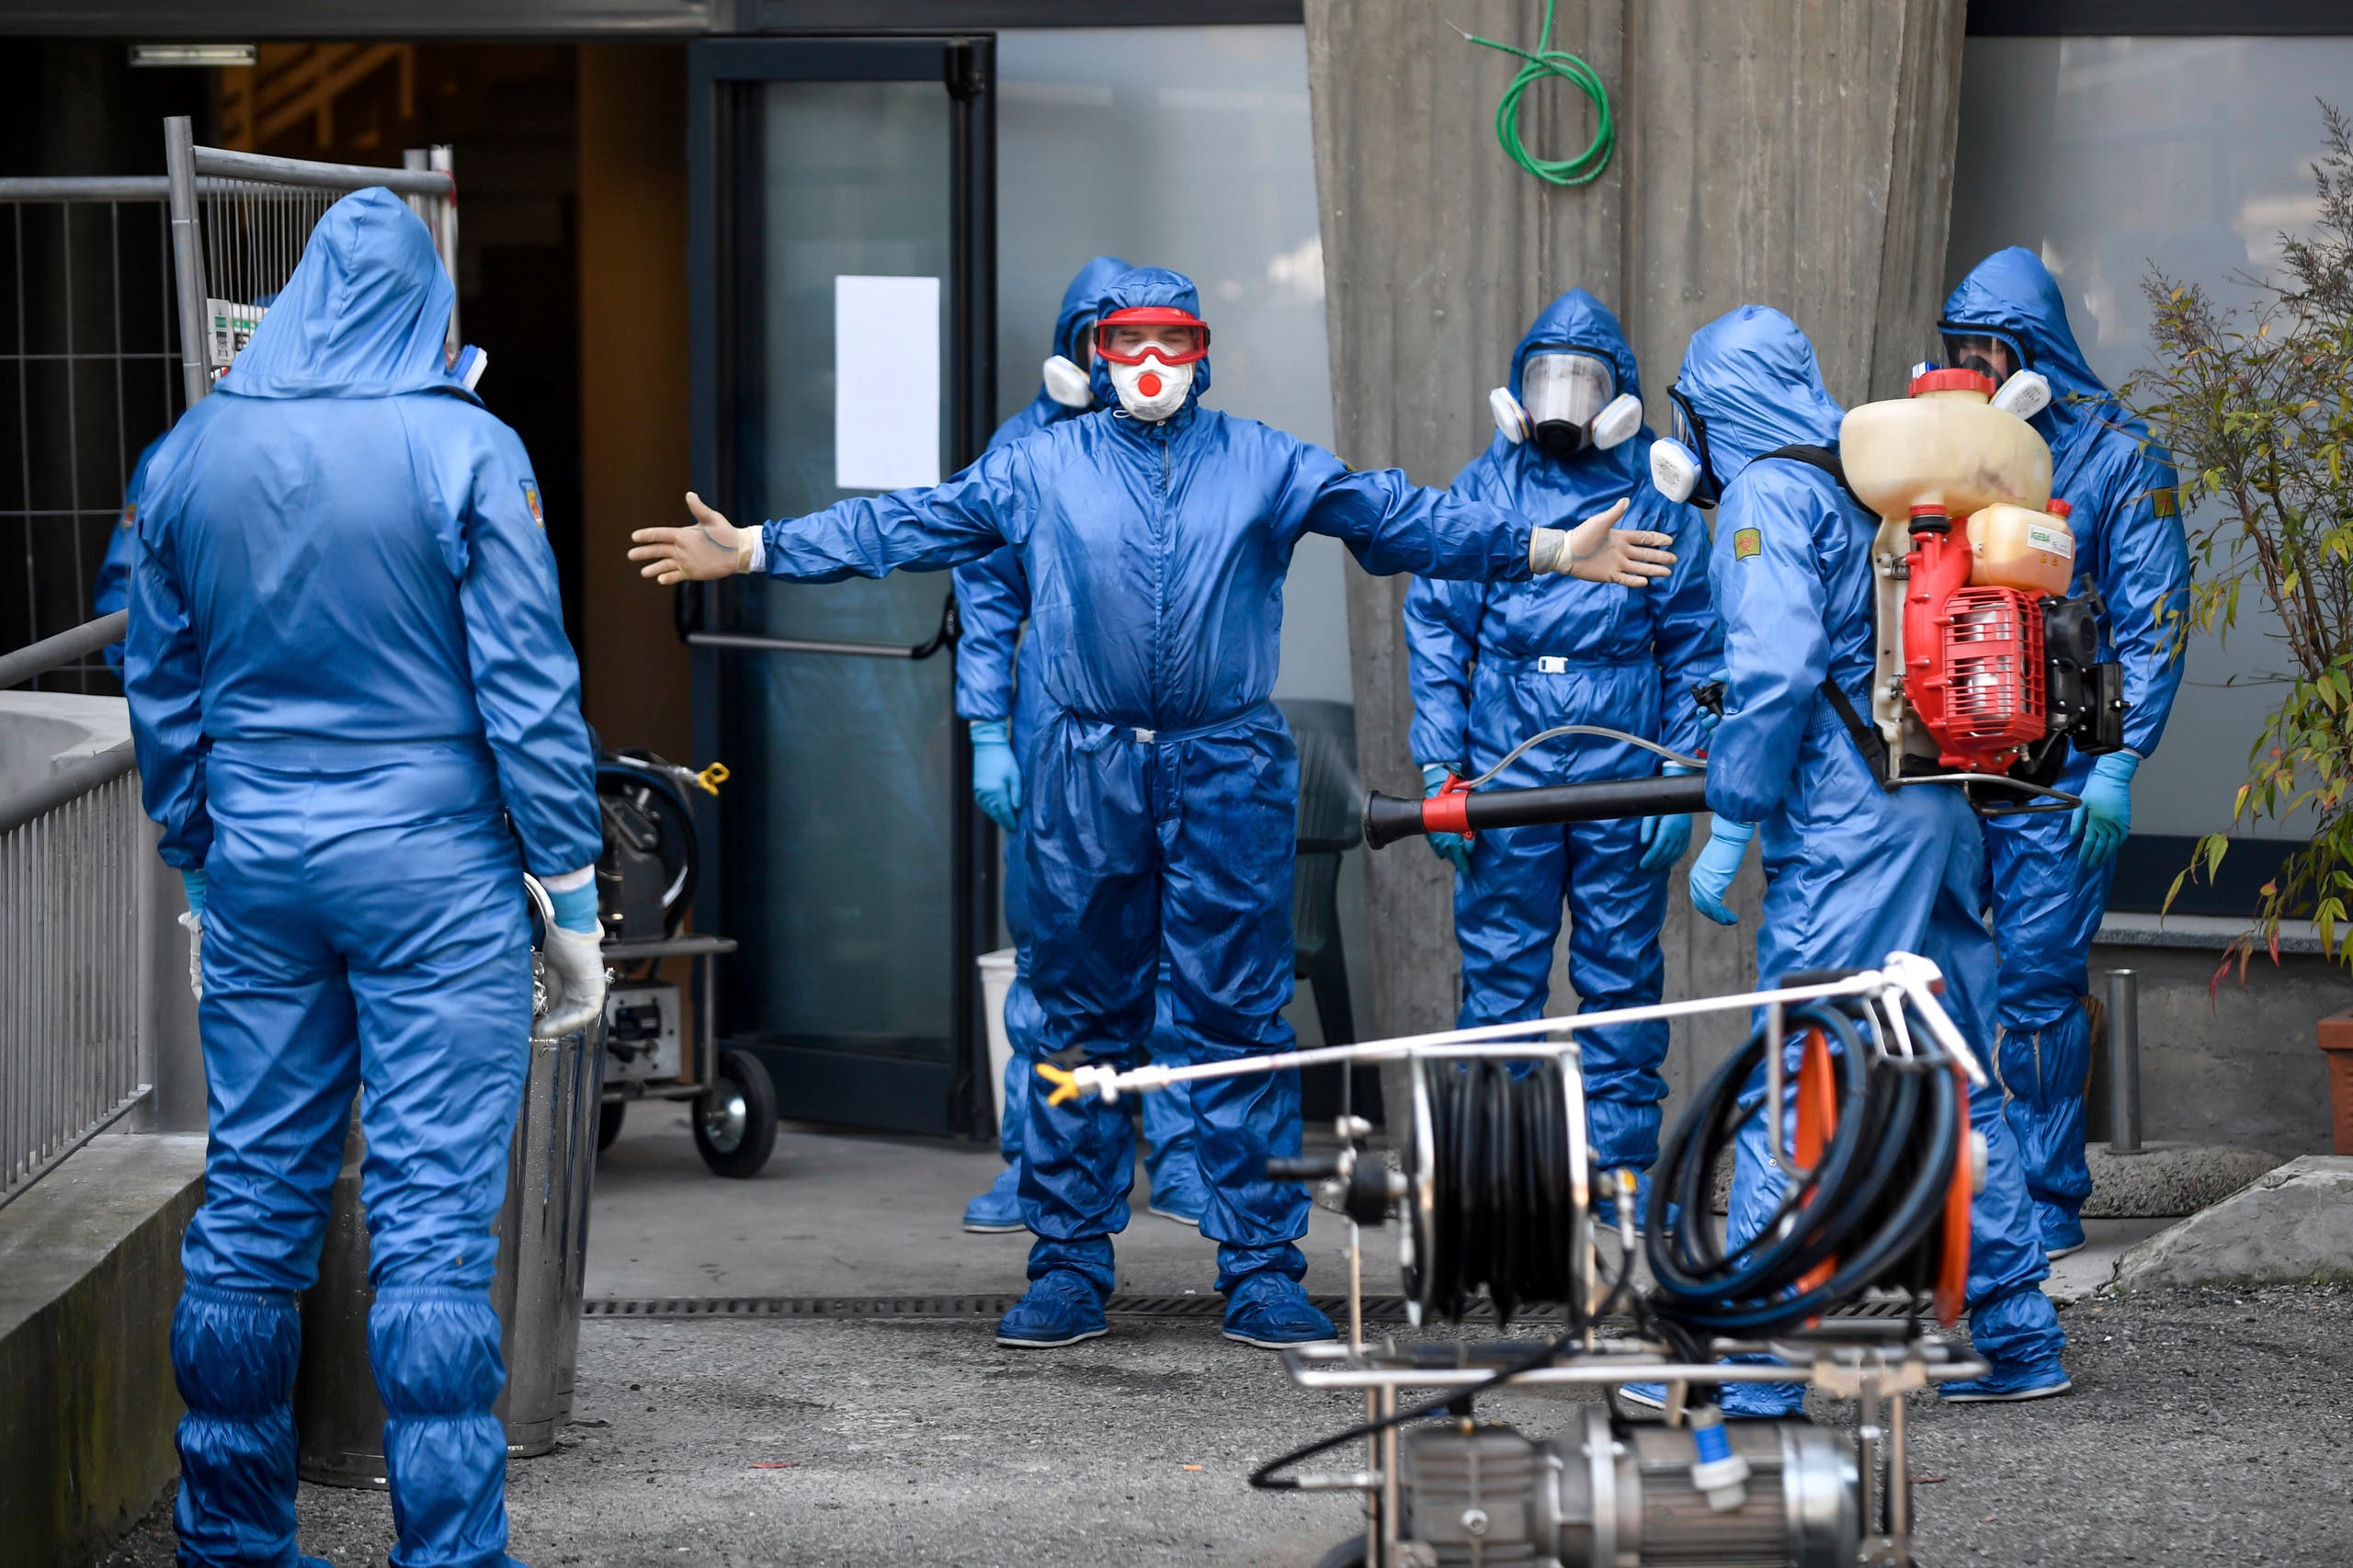 Members of a Russian team sanitize a hospice for elderly people to contain the spread of the Covid-19 virus, in Albino, near Bergamo, northern Italy on March 28, 2020. (AP)